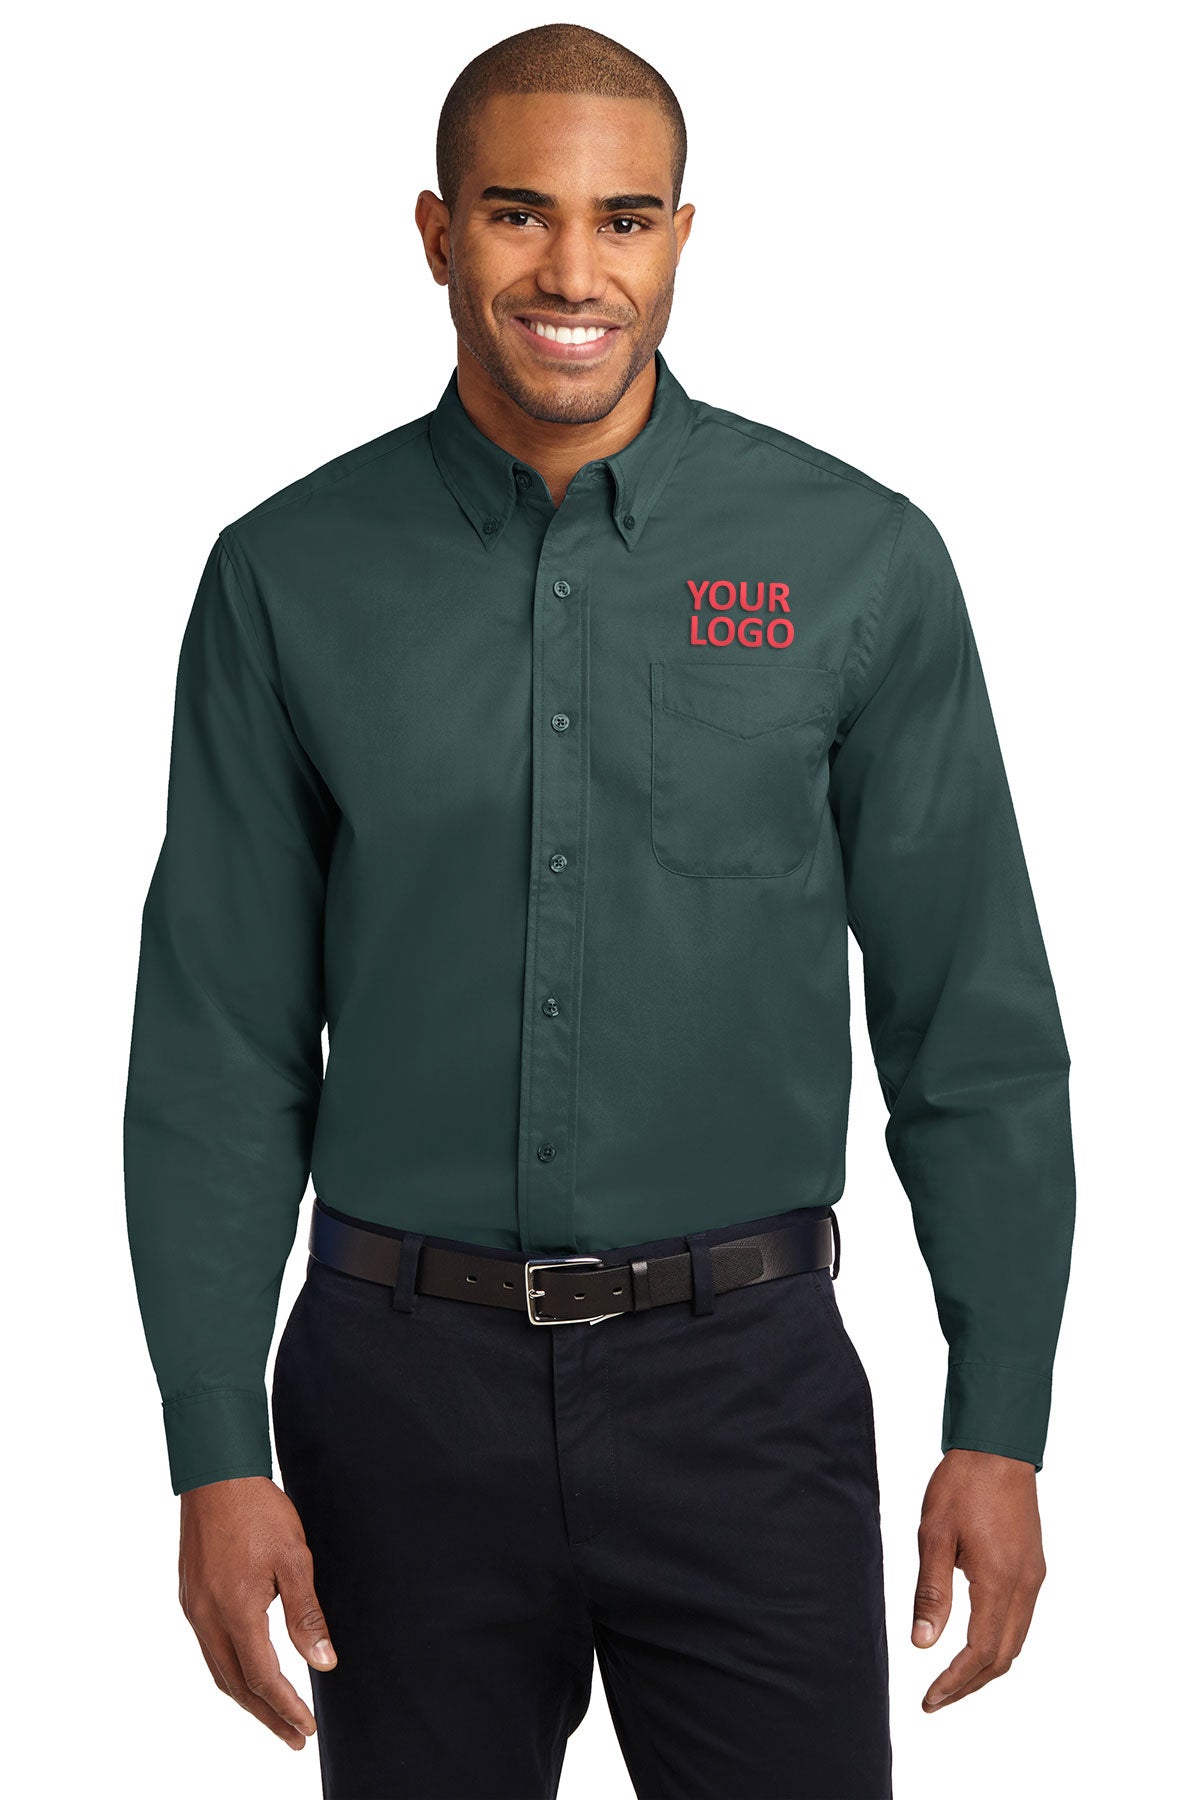 Port Authority Dark Green/ Navy TLS608 order embroidered polo shirts